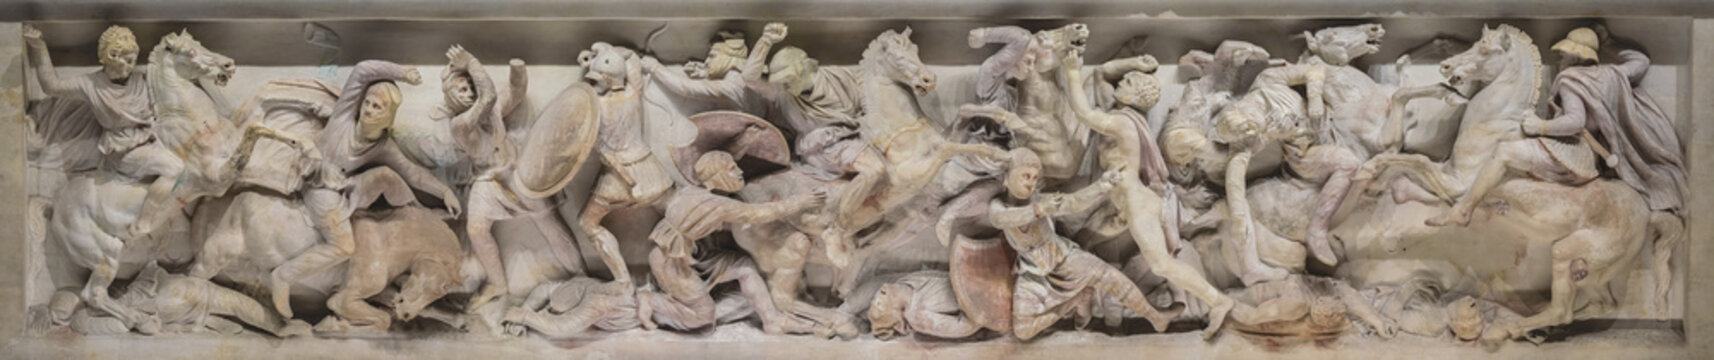 Alexander sarcophagus, battle scene relief. Alexander the Great routs Persians. Lycian Sarcophagus from Sidon (Lebanon). Painted relief, long side. Istanbul Archaeology Museum, Turkey. Oct. 18, 2022